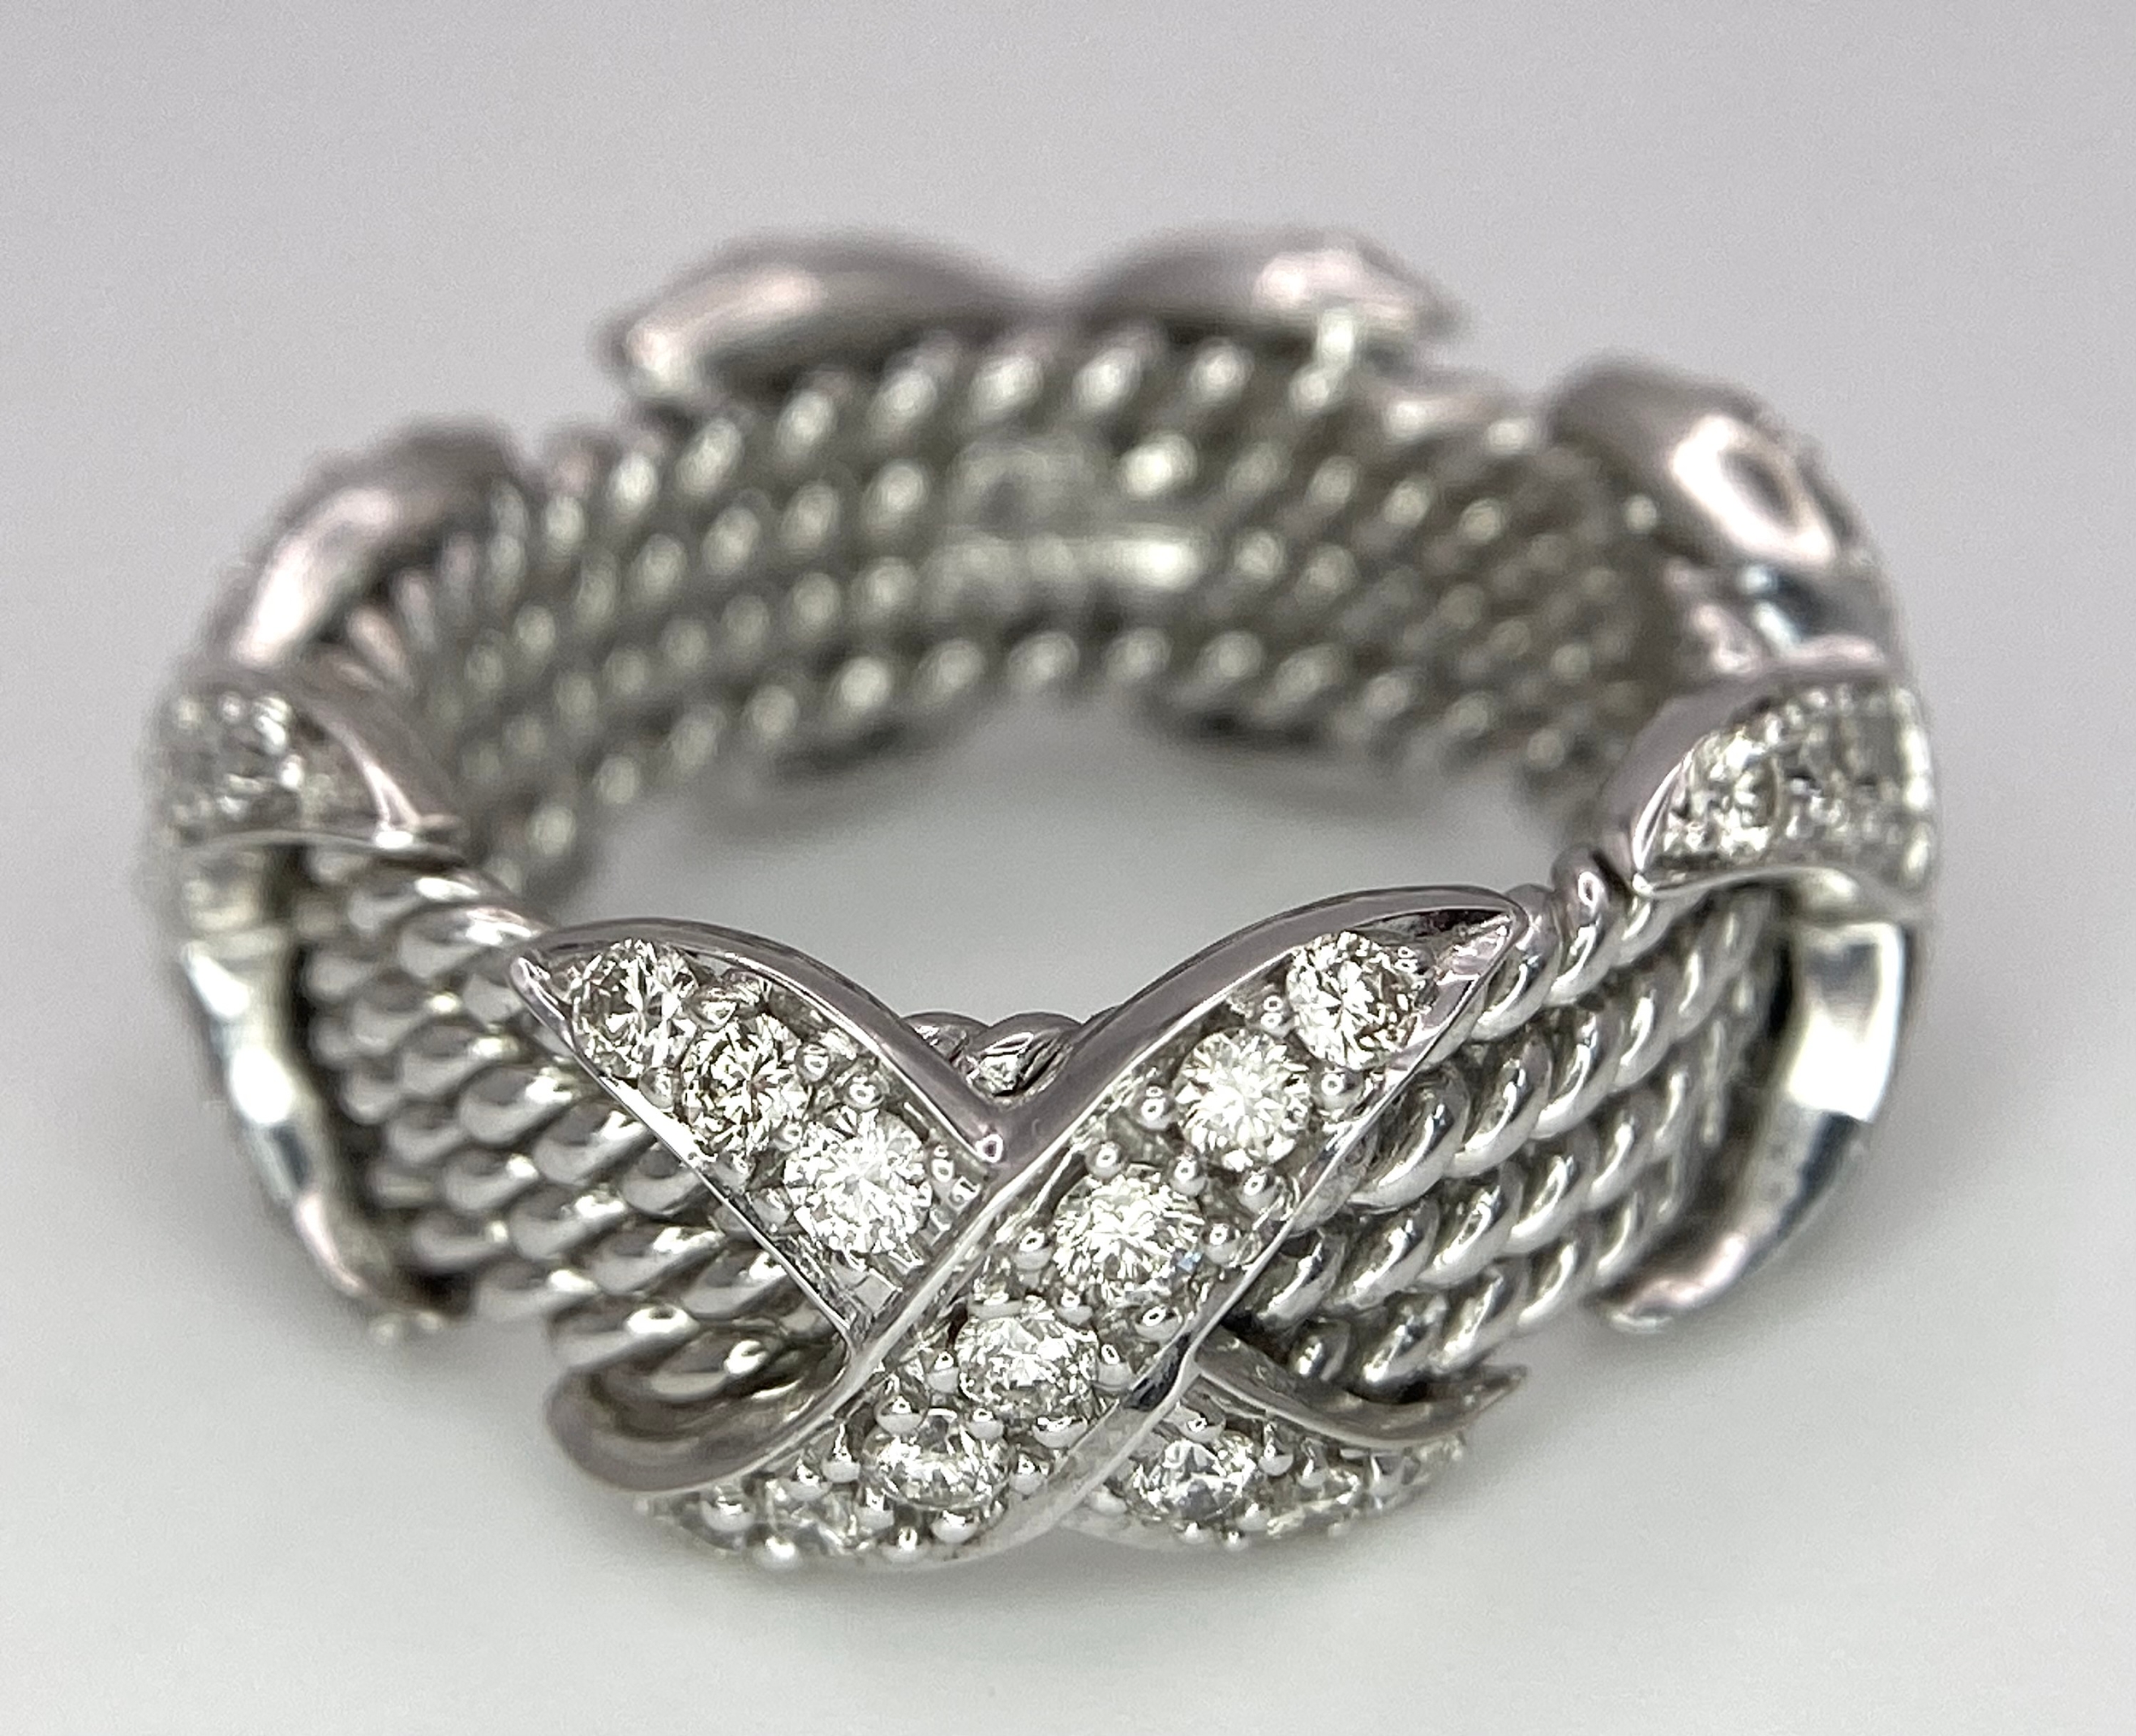 A 9K WHITE GOLD FANCY DIAMOND KISS RING. 0.80ctw, Size K, 6.6g total weight. Ref: SC 8051 - Image 5 of 6